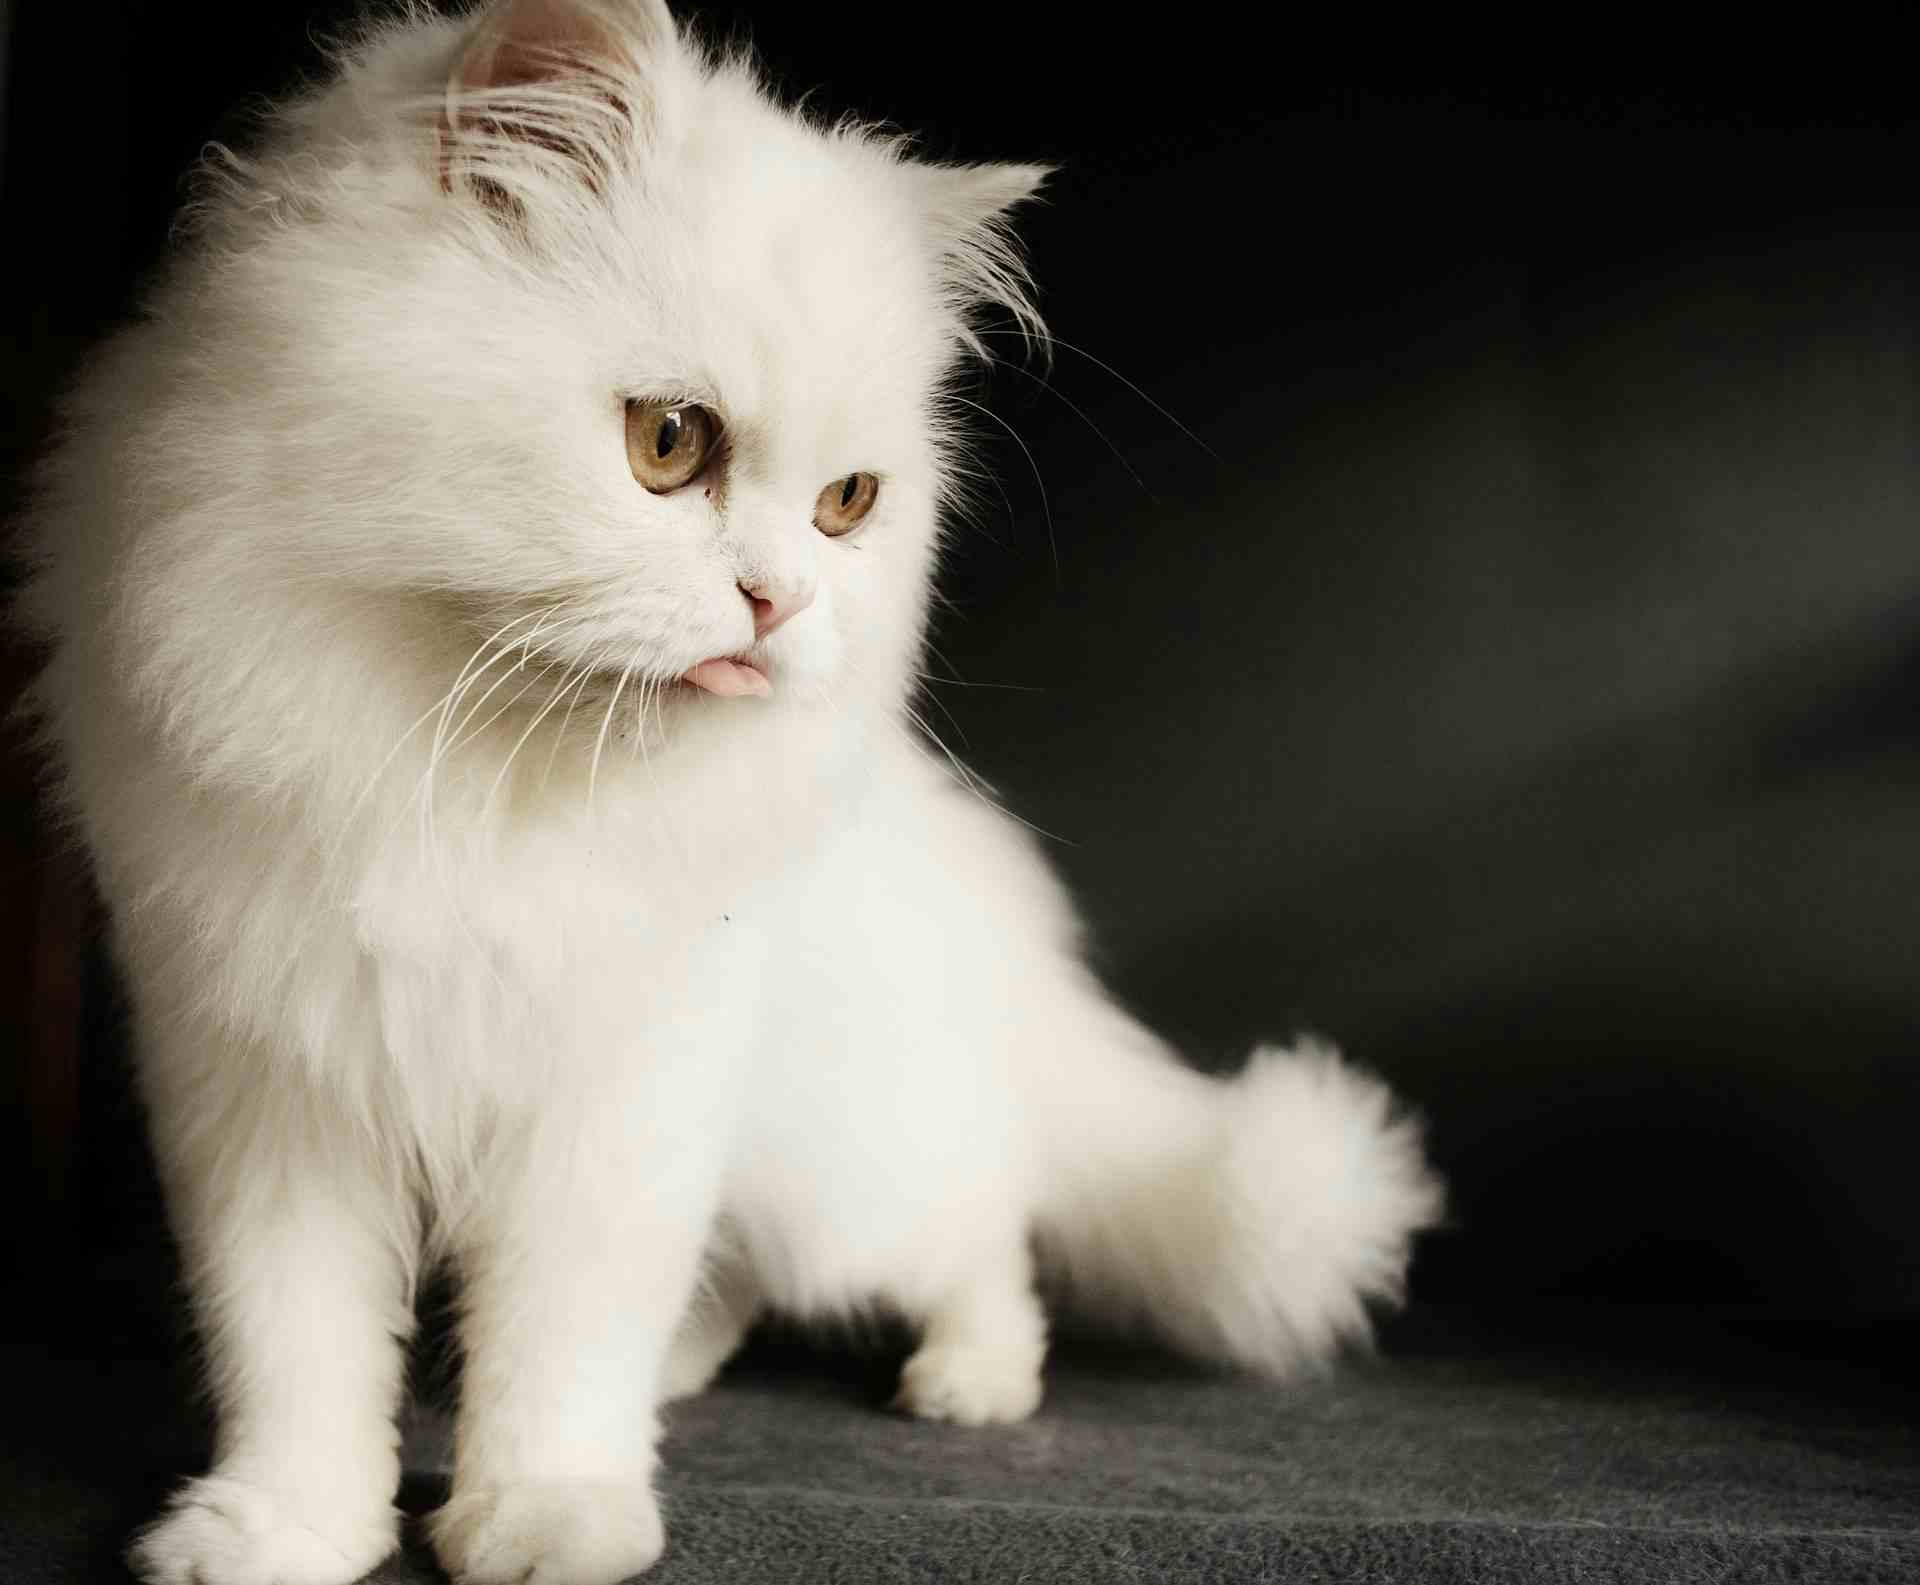 Sassy looking Persian cat bopping its tongue out.